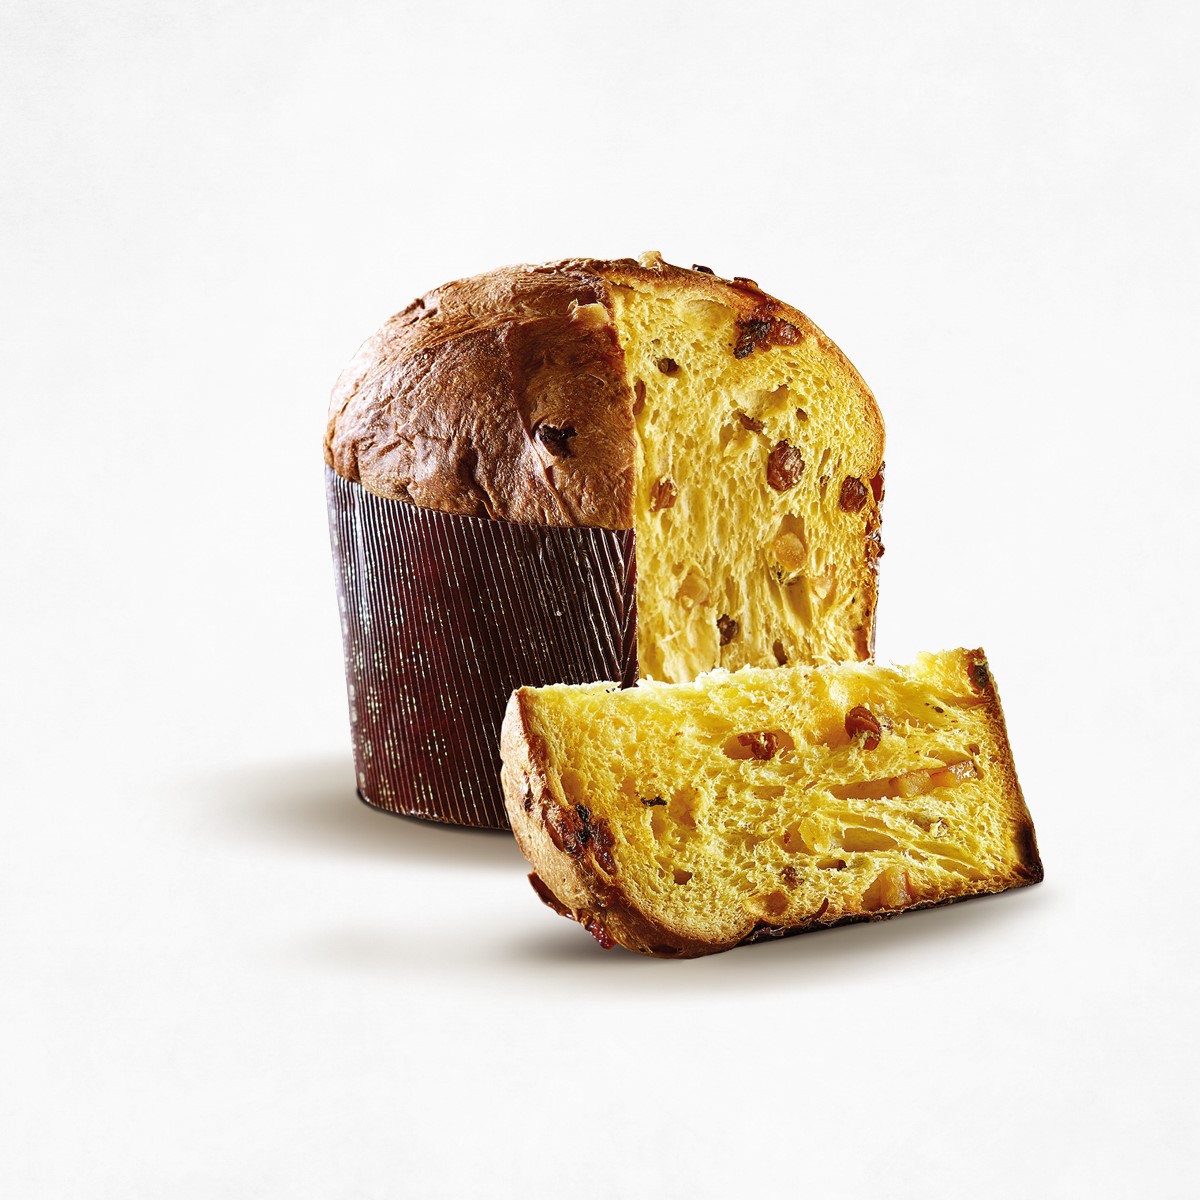 Today is the day! The event on Artisanal Panettone Report data disclosure in collaboration with @NielsenIQ will take place in the beautiful frame of Eataly Smeraldo in Milan at 18.00. To follow the event in Italian remember to sign at the platform: eventi.senaf.it/login.php?ide=…